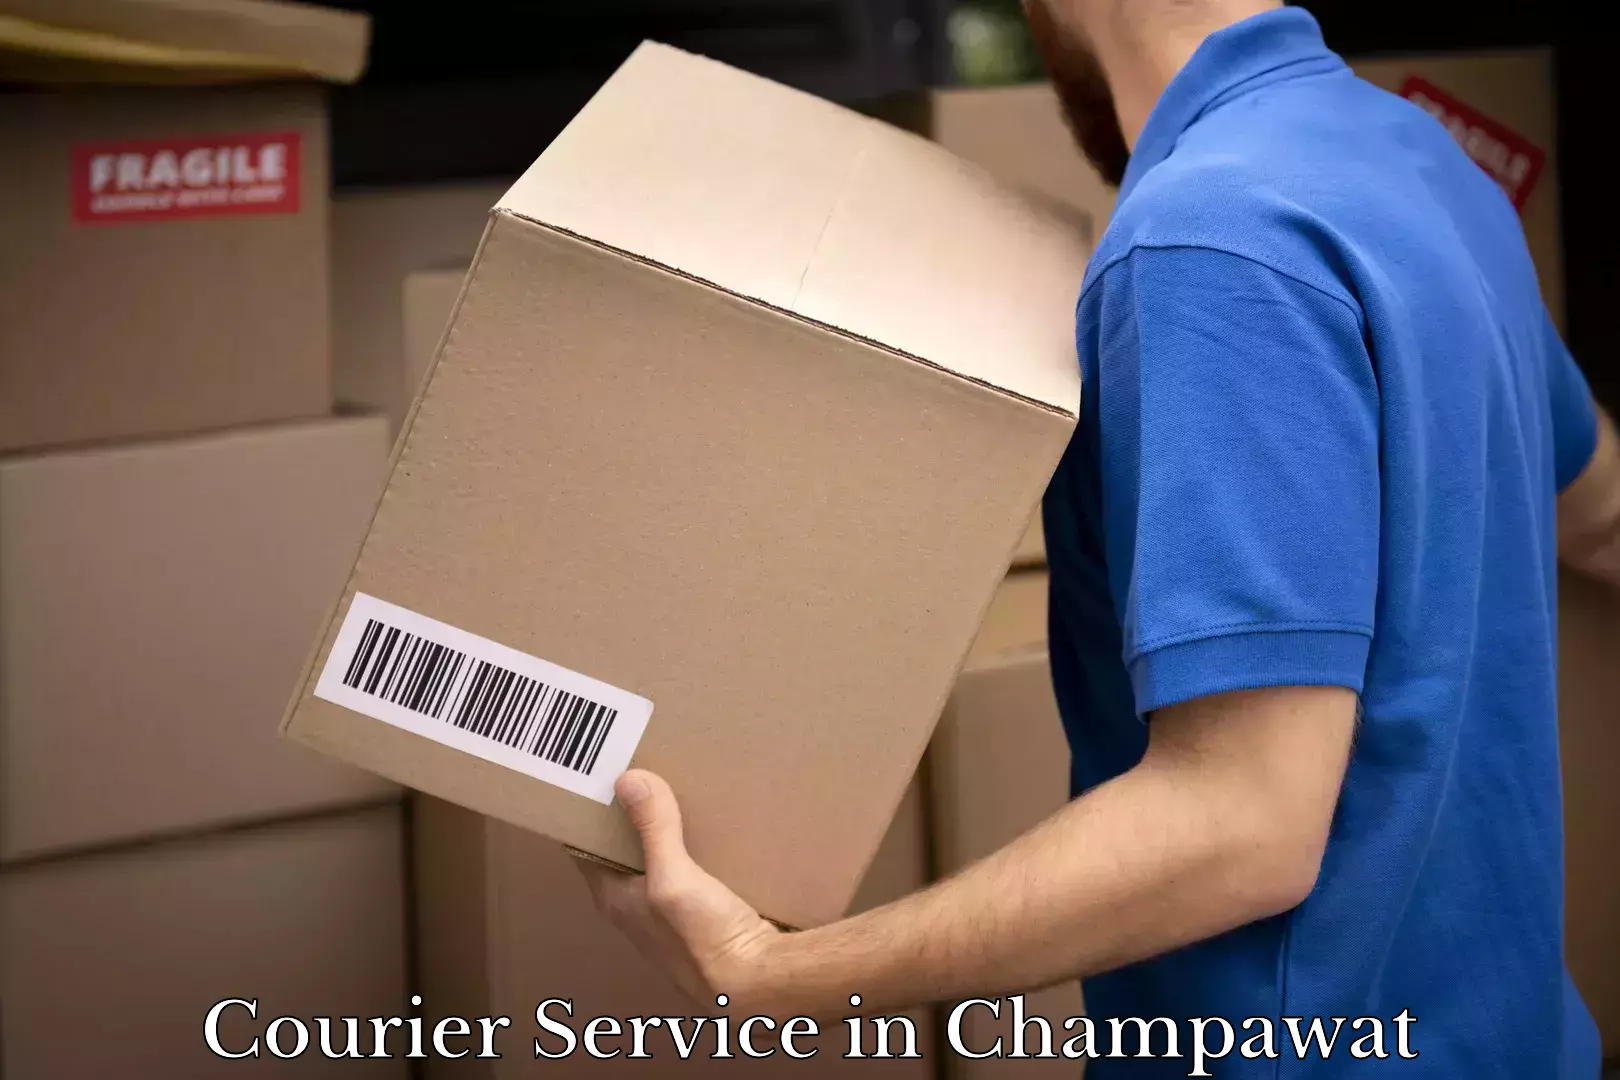 Affordable parcel service in Champawat